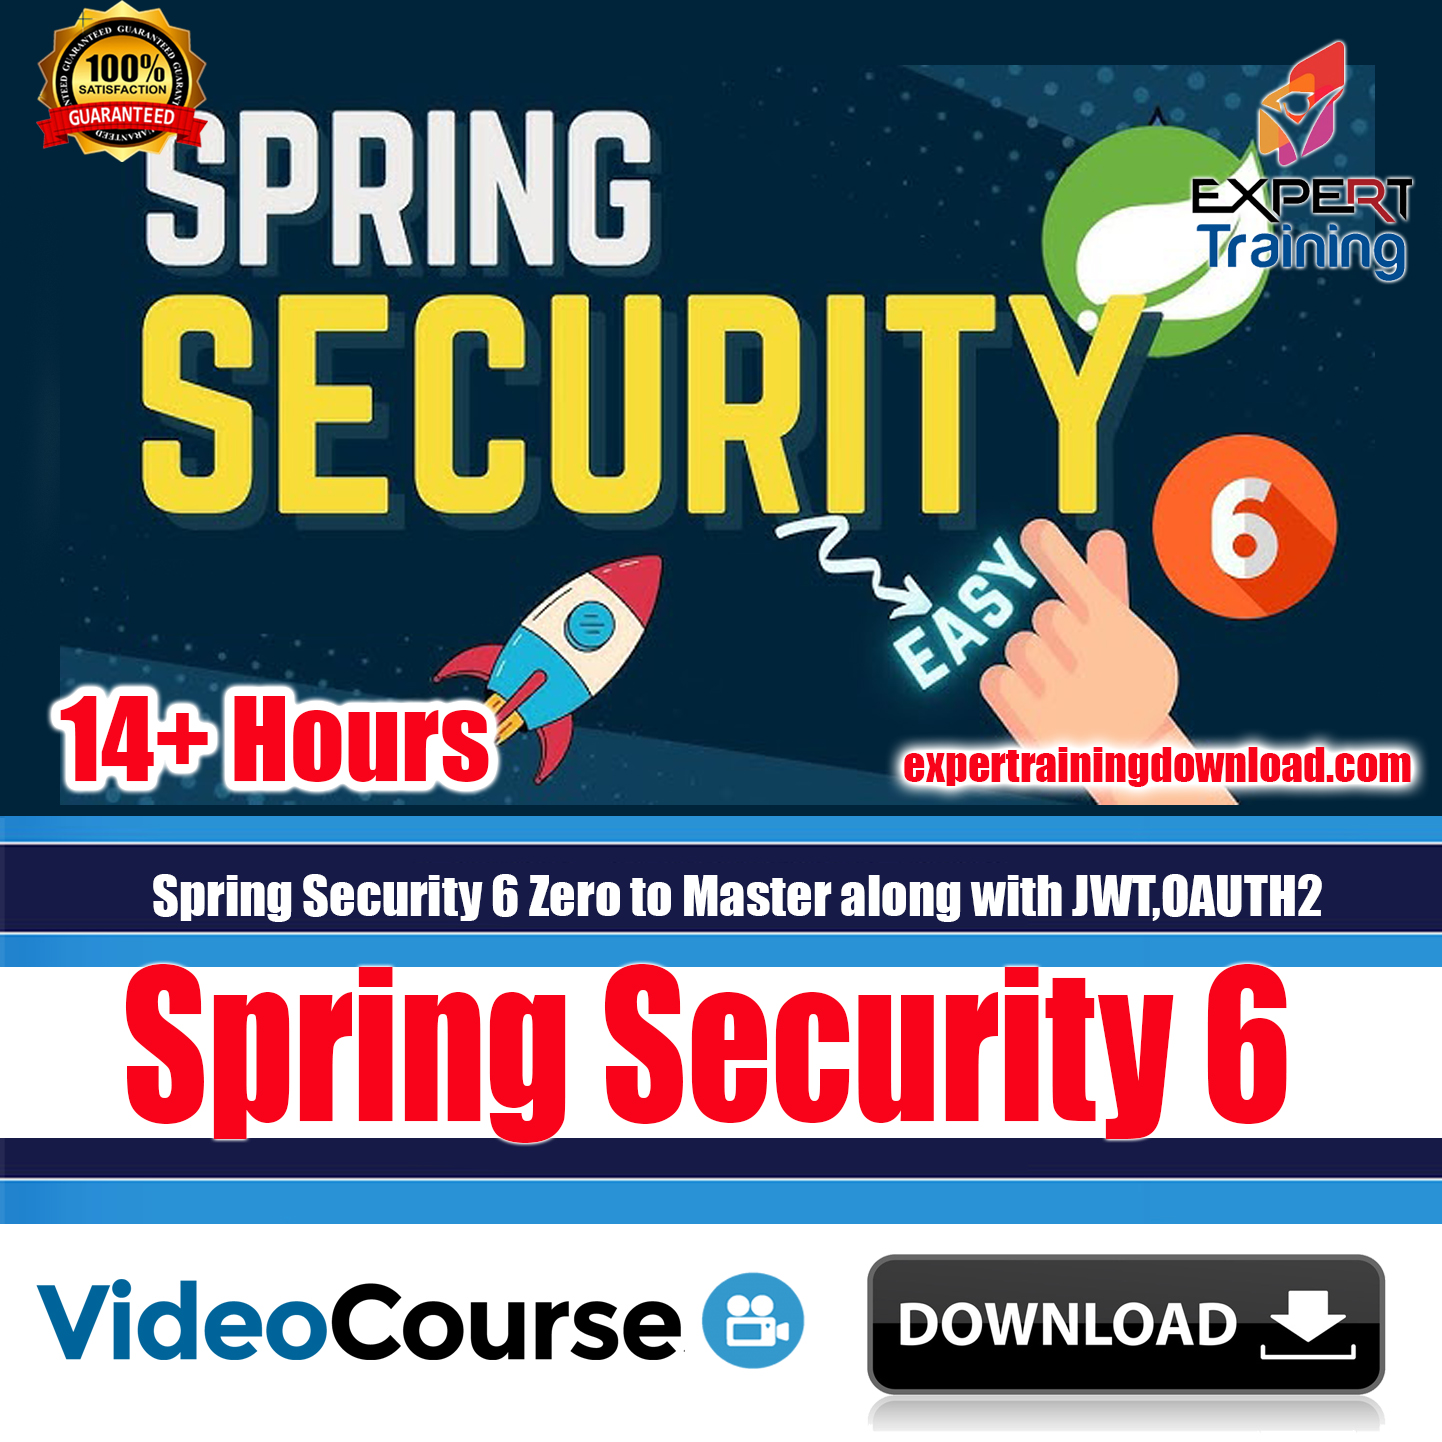 Spring Security 6 Zero to Master along with JWT,OAUTH2